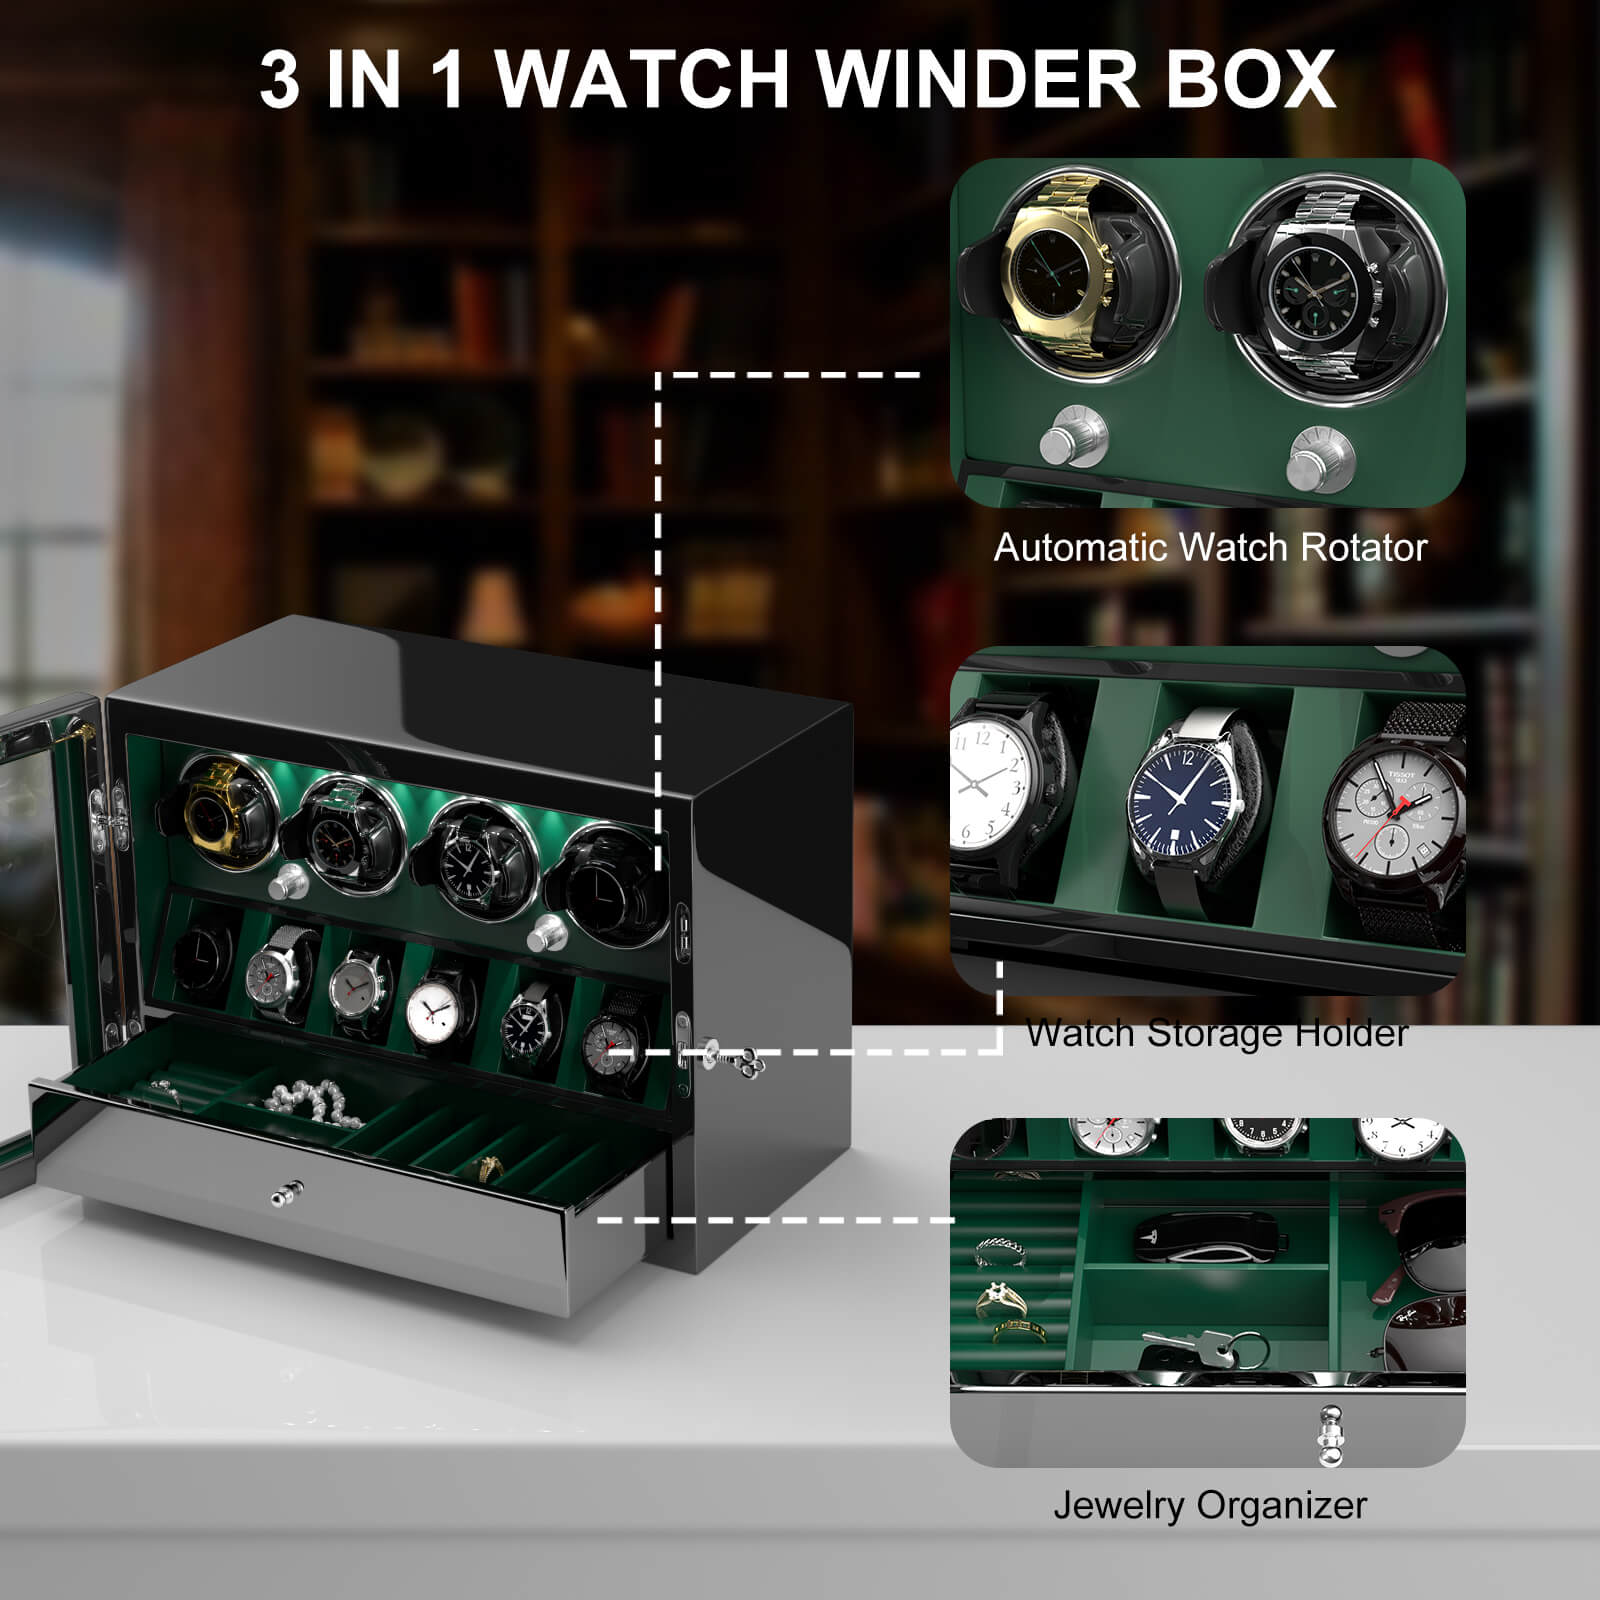 Compact 4 Watch Winders for Automatic Watches with 6 Storage Space Quiet Mabuchi Motor- Green